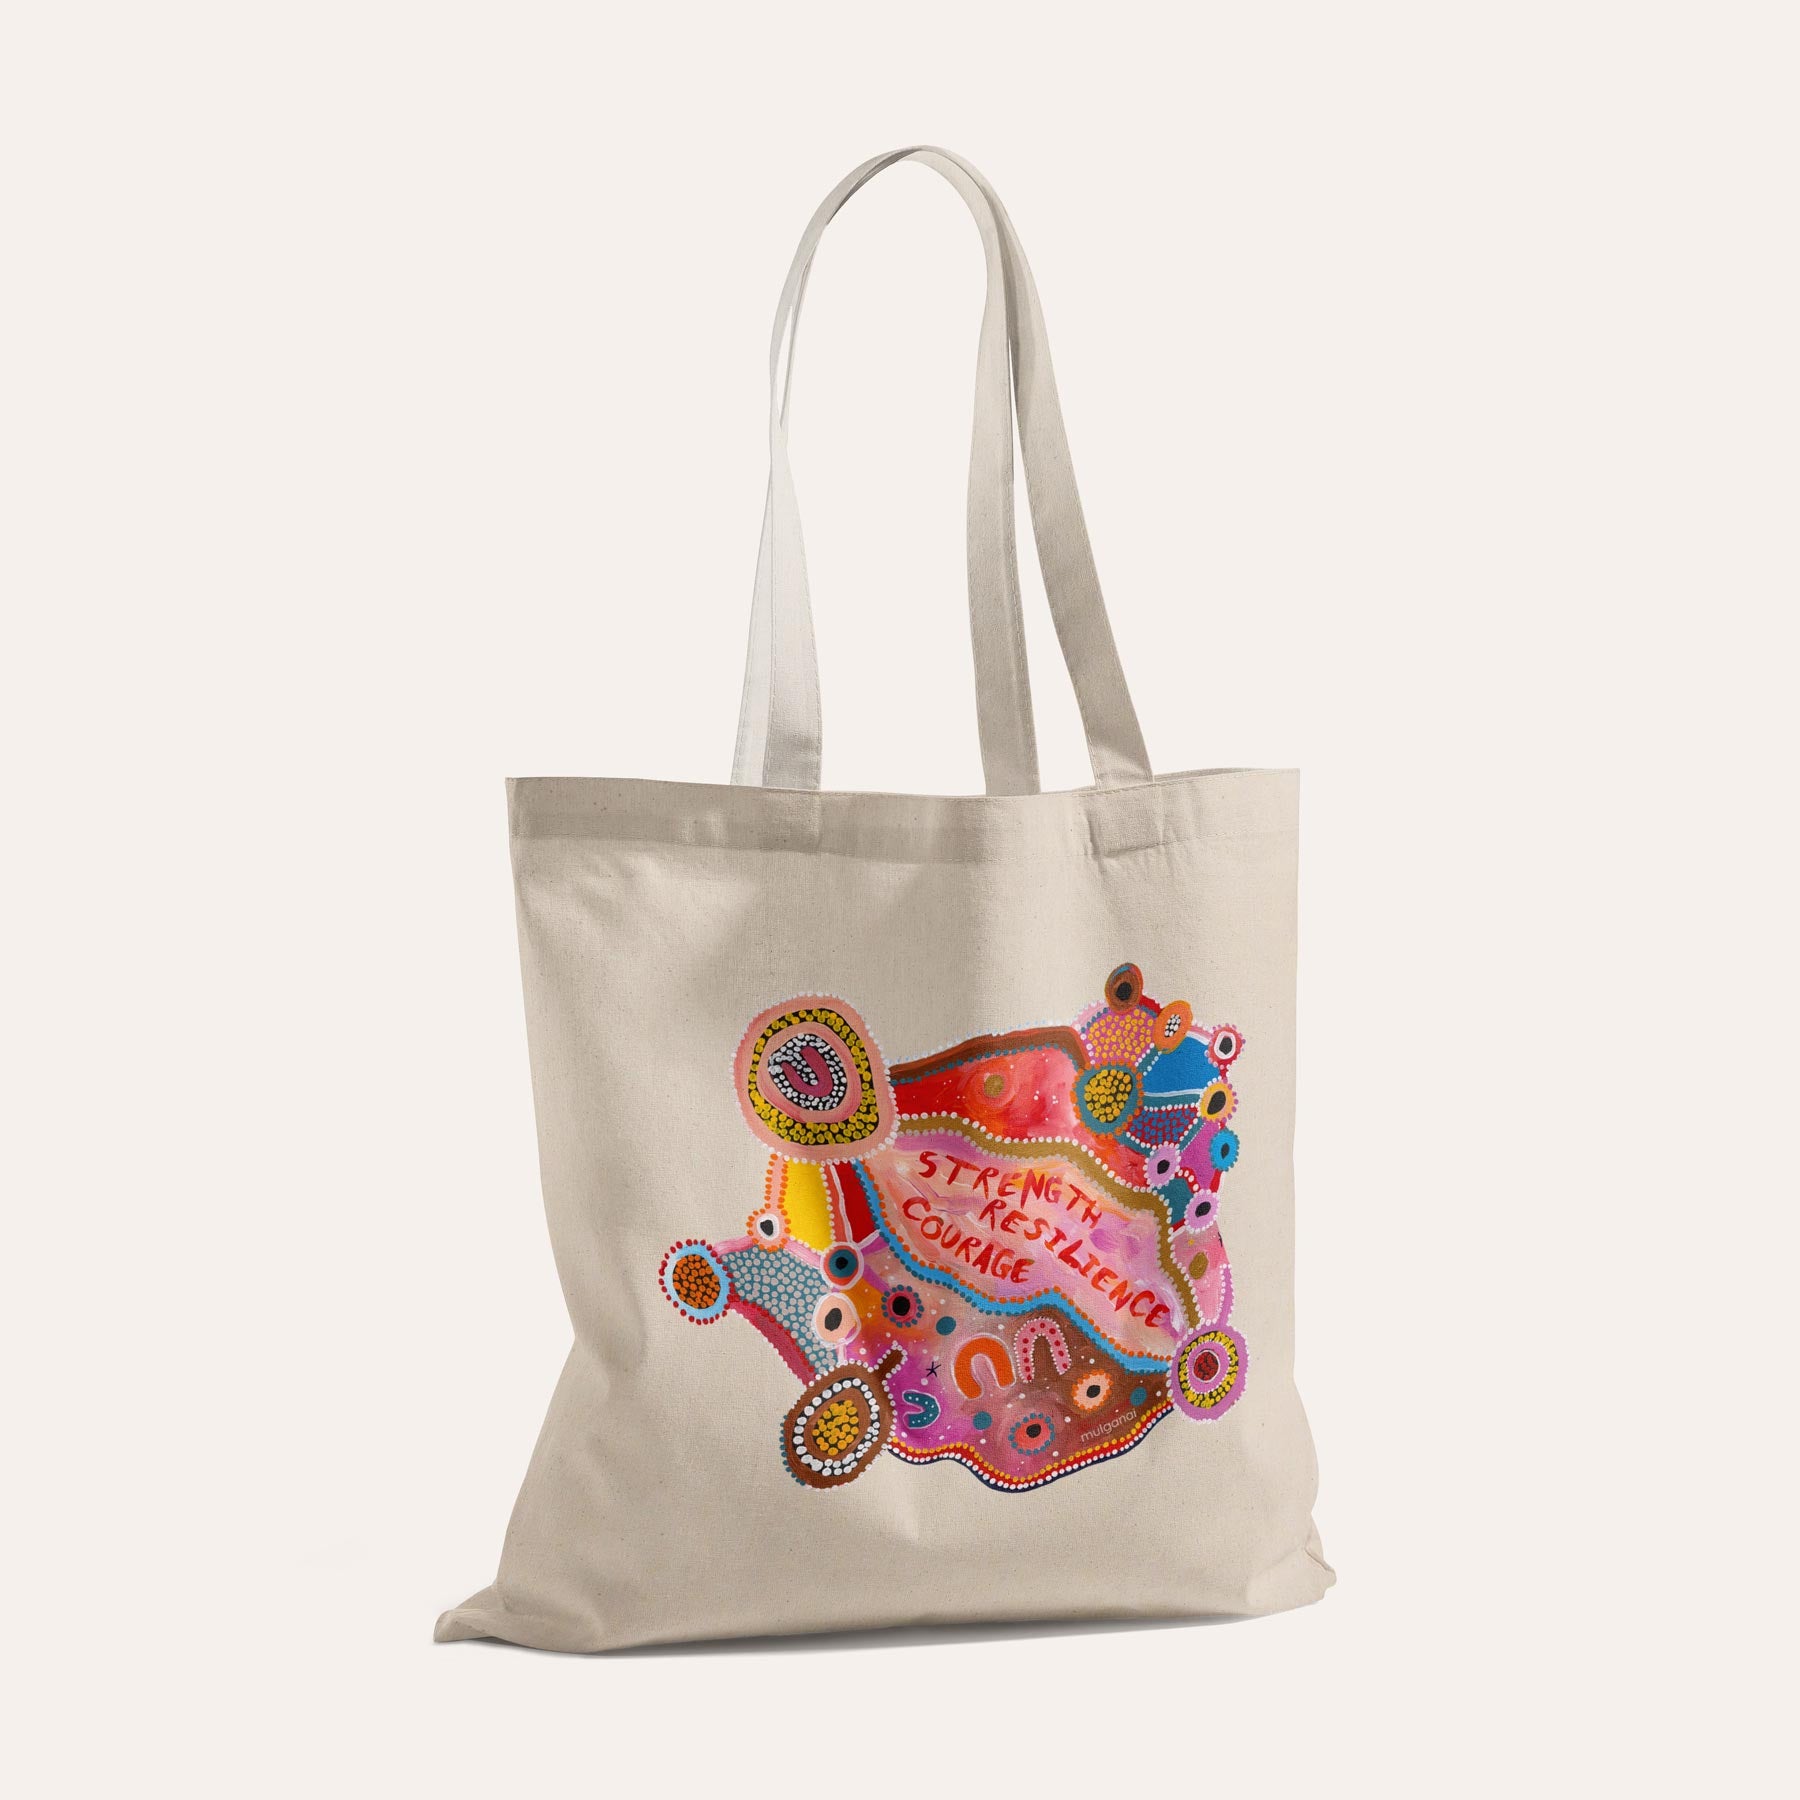 Cotton Tote Bag, Strength Of Our Elders